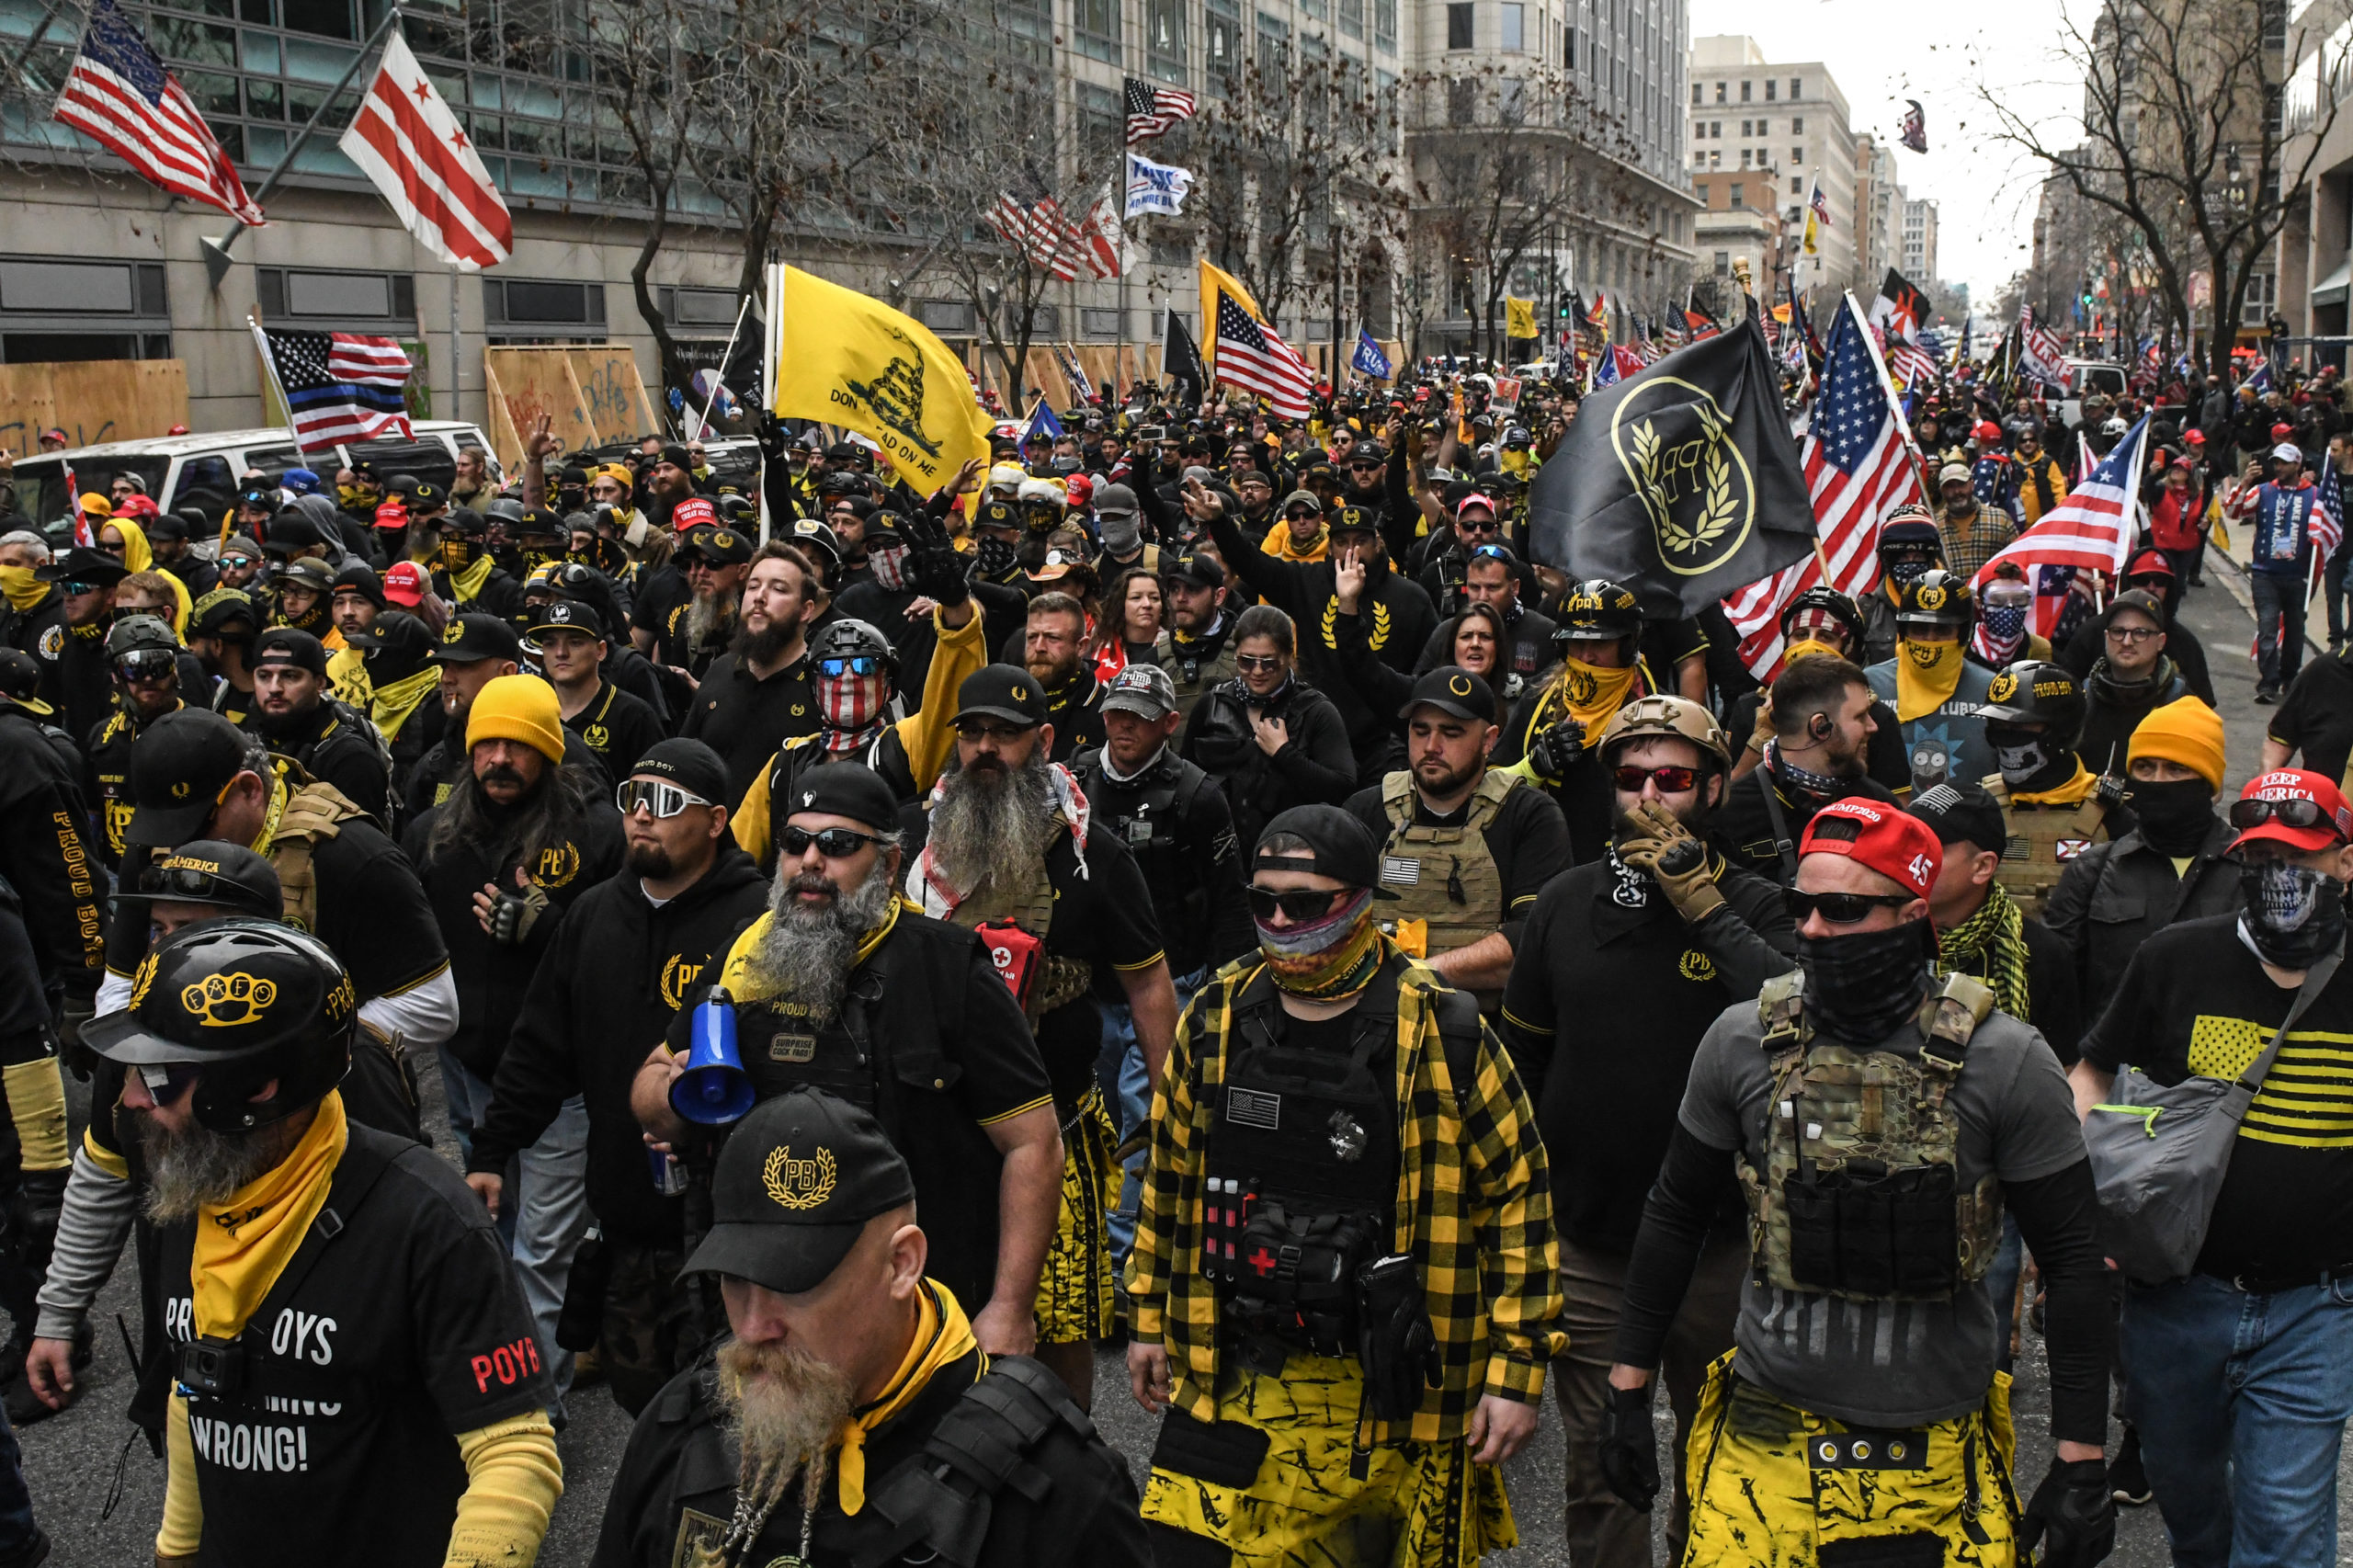 FAFO Proud Boys explained: What does the acronym mean?